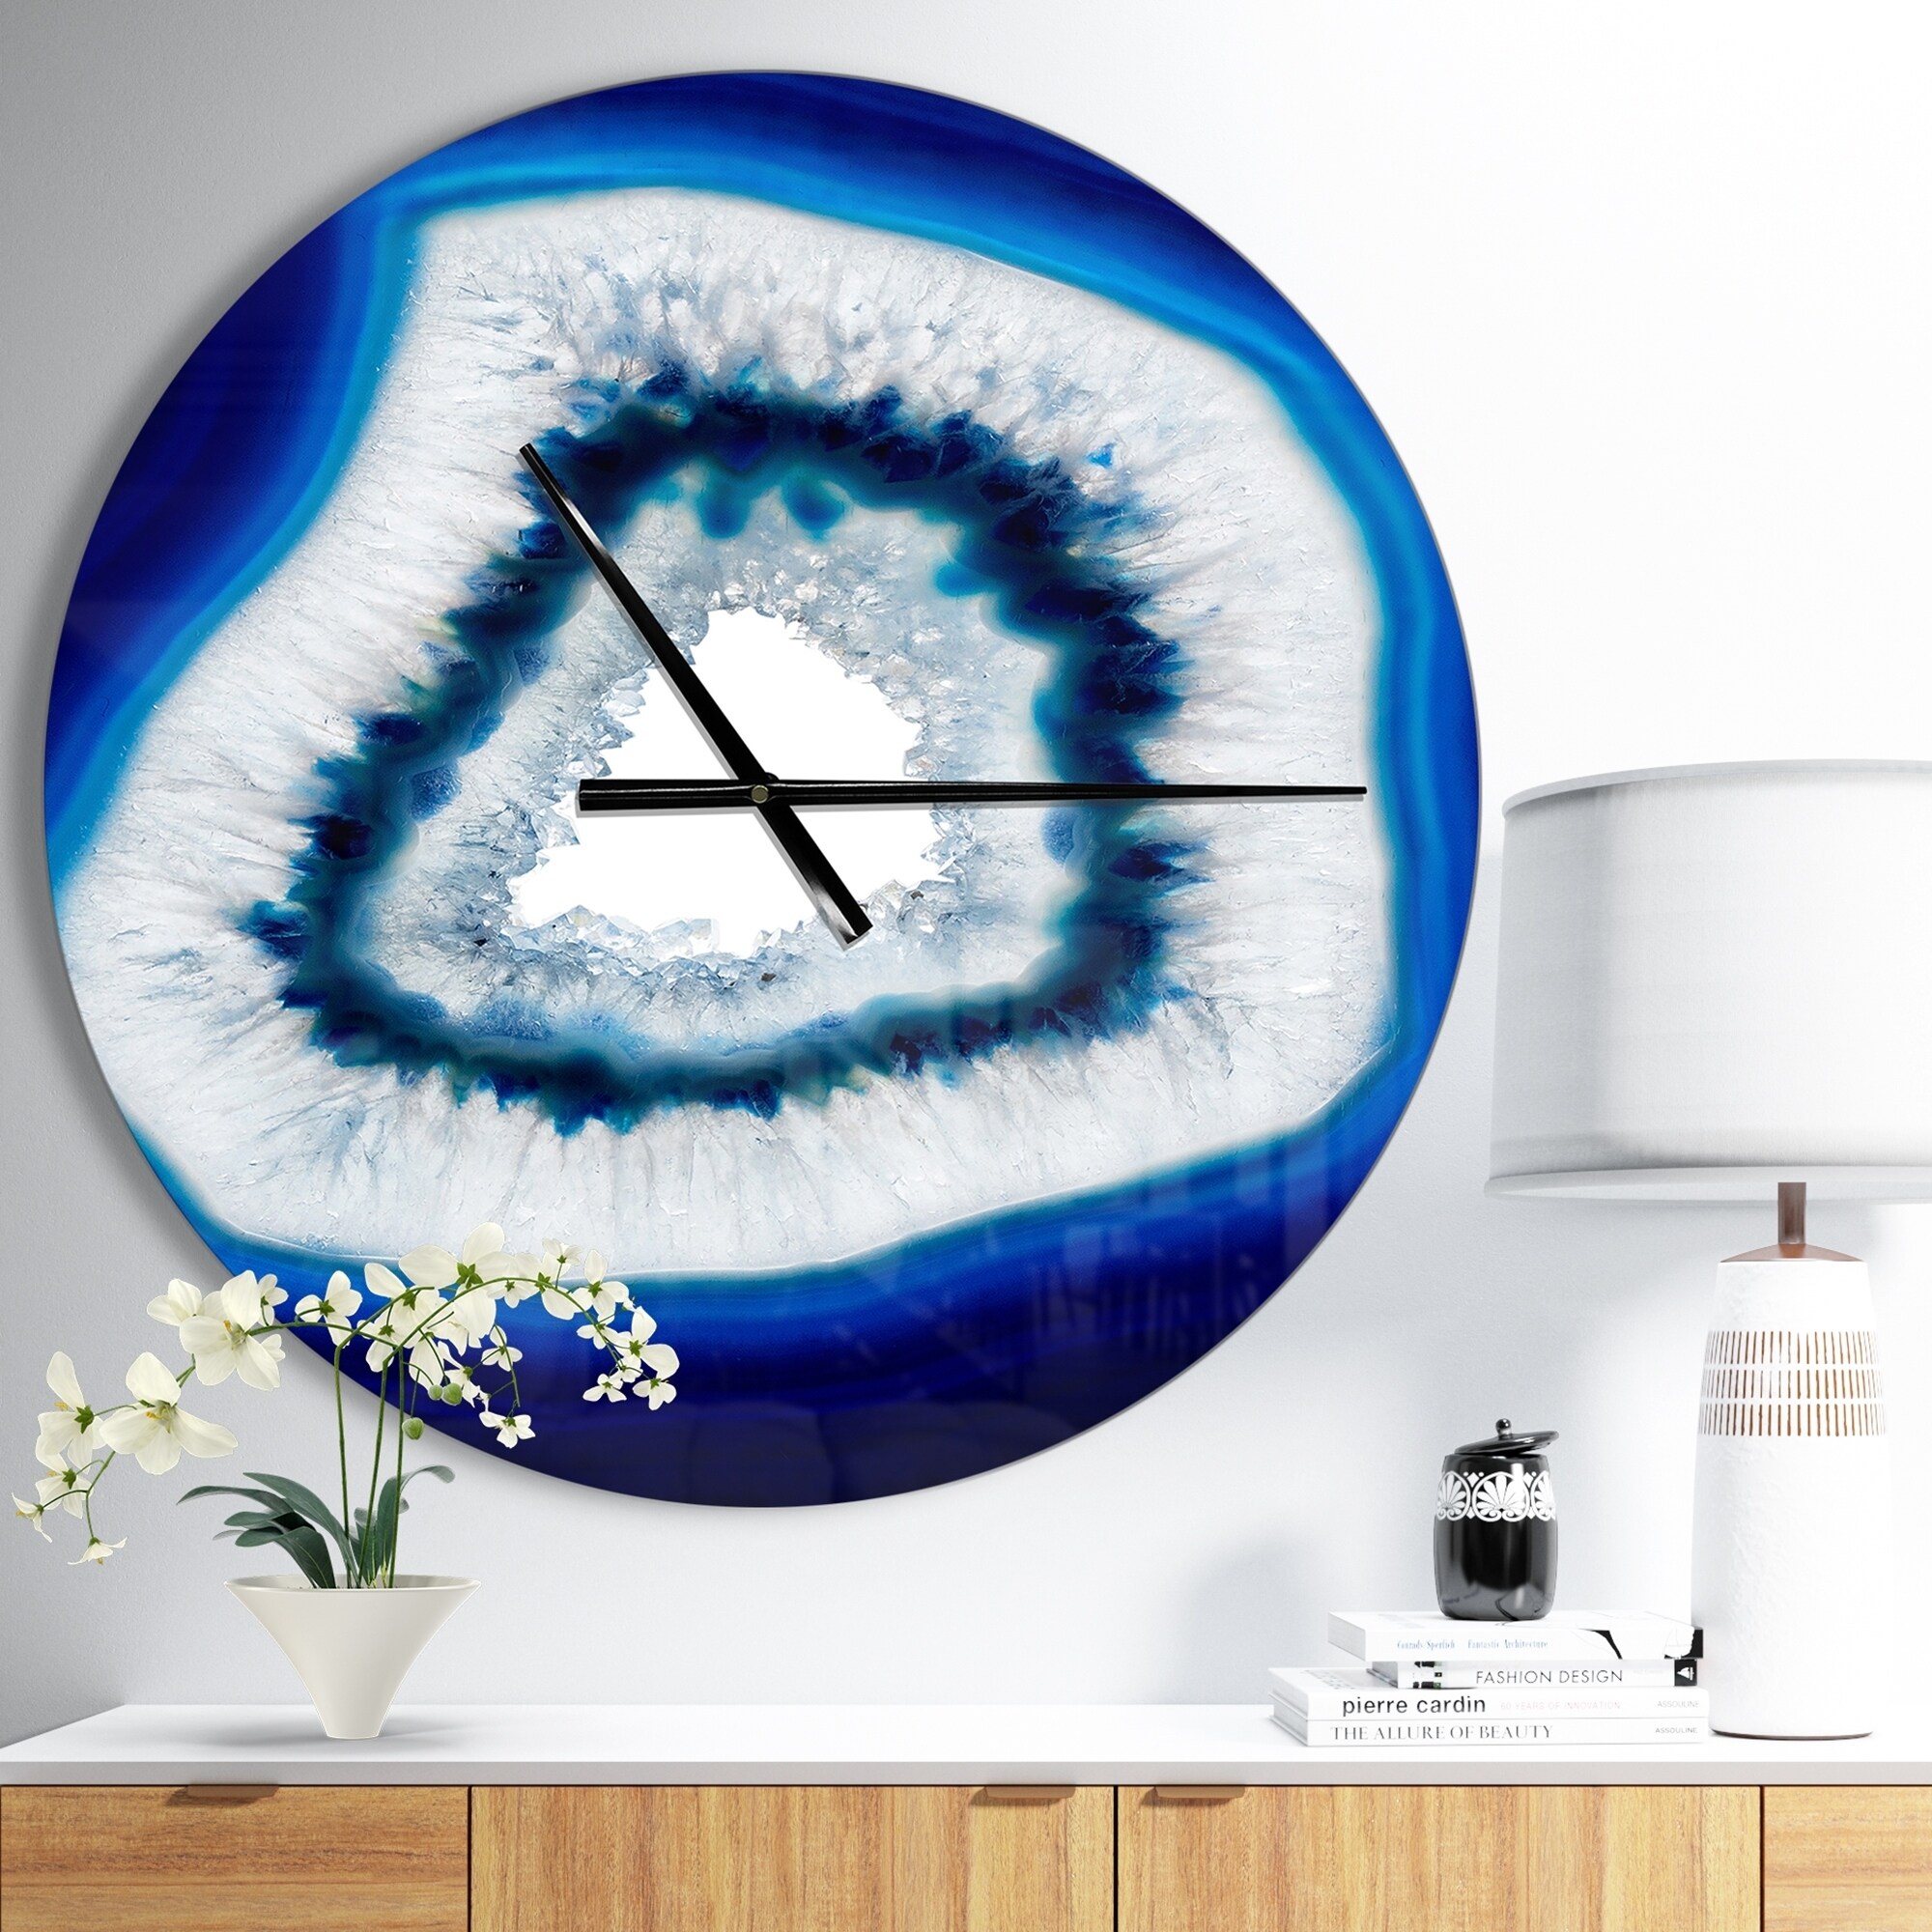 Featured image of post Cobalt Blue Wall Clock - Unique wall clock can really set the tone and style for a room and bring a real sense of purpose to a space.check our reviews of the unique wall clocks!